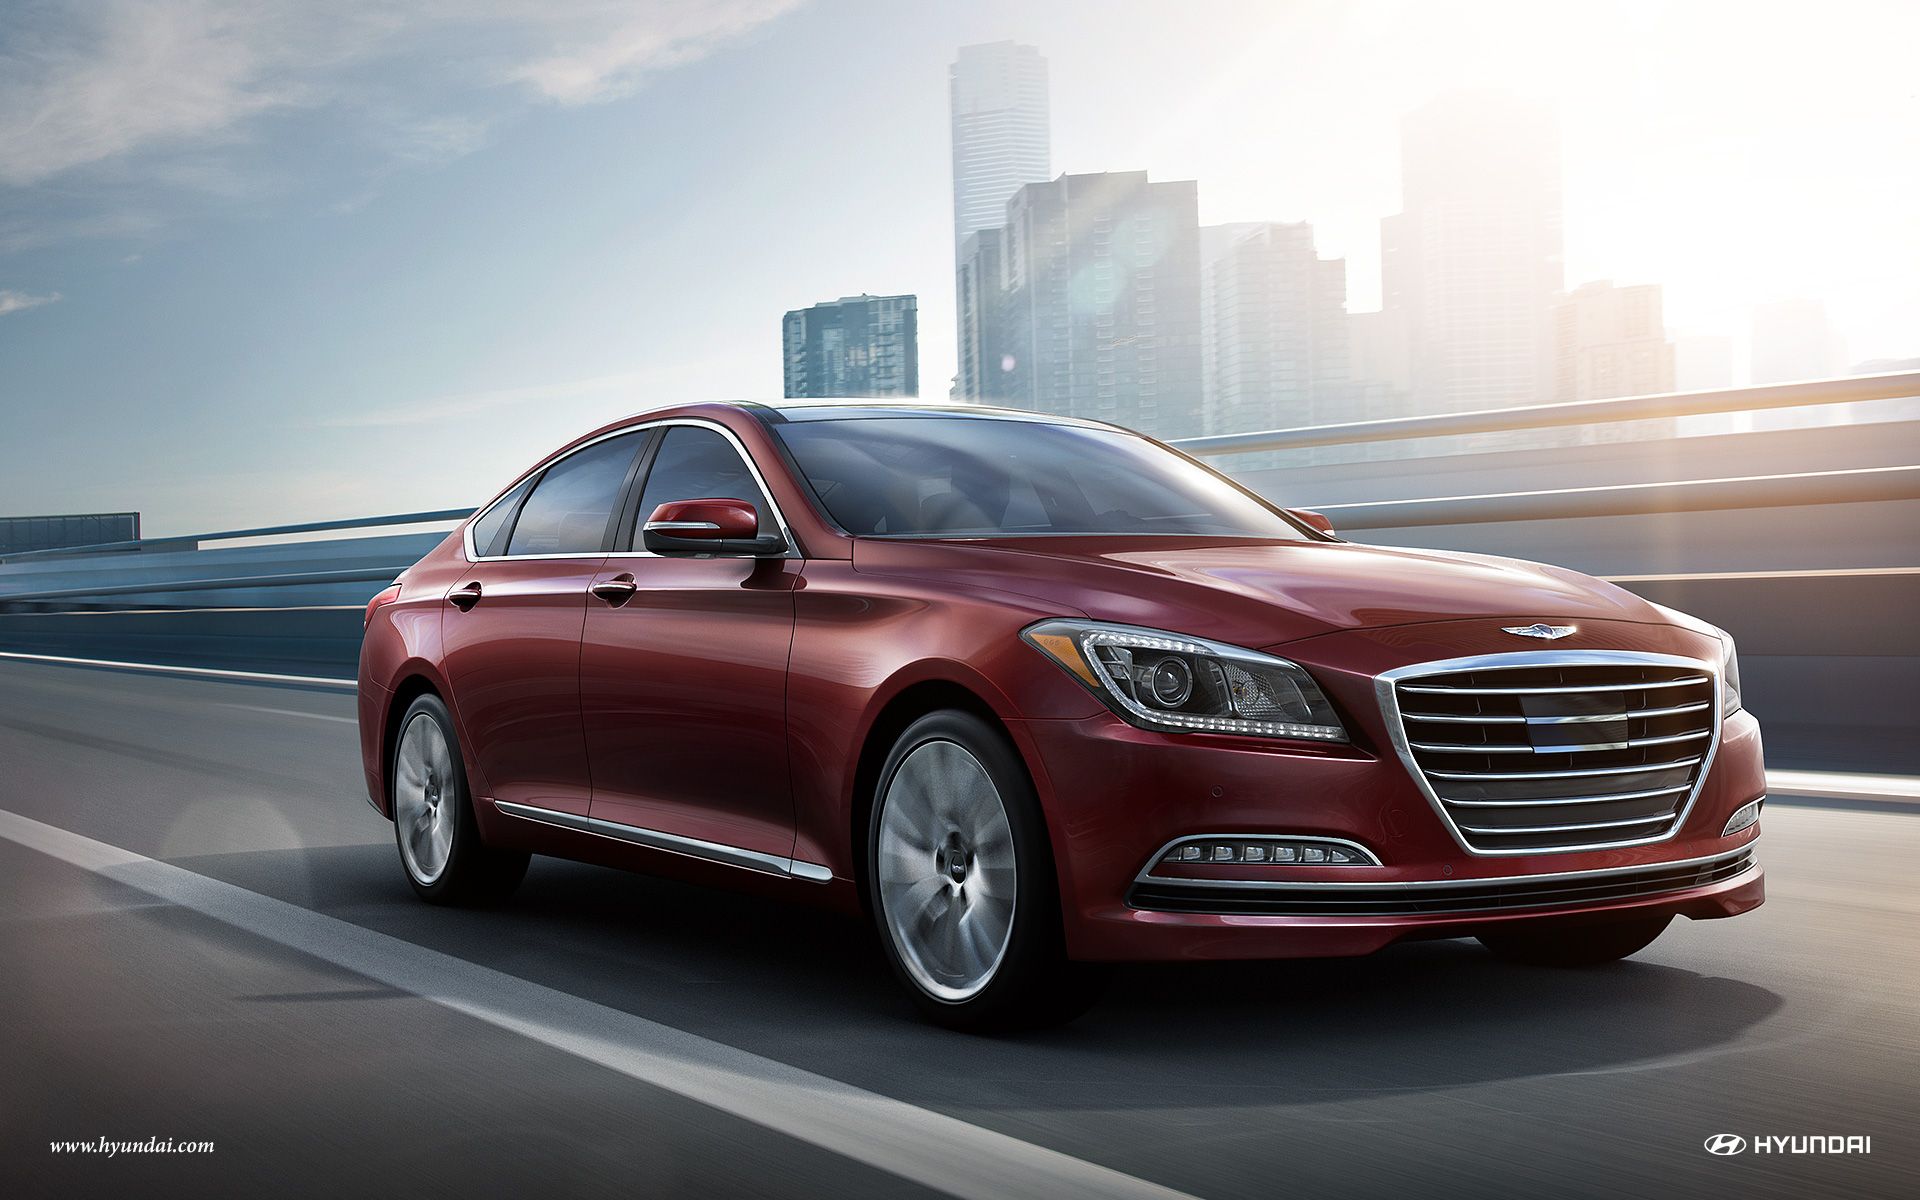 A Girls Guide To Cars | Hyundai Goes Upscale With Genesis Brand, But Would You Buy One? - 2016 Hyundai Genesis